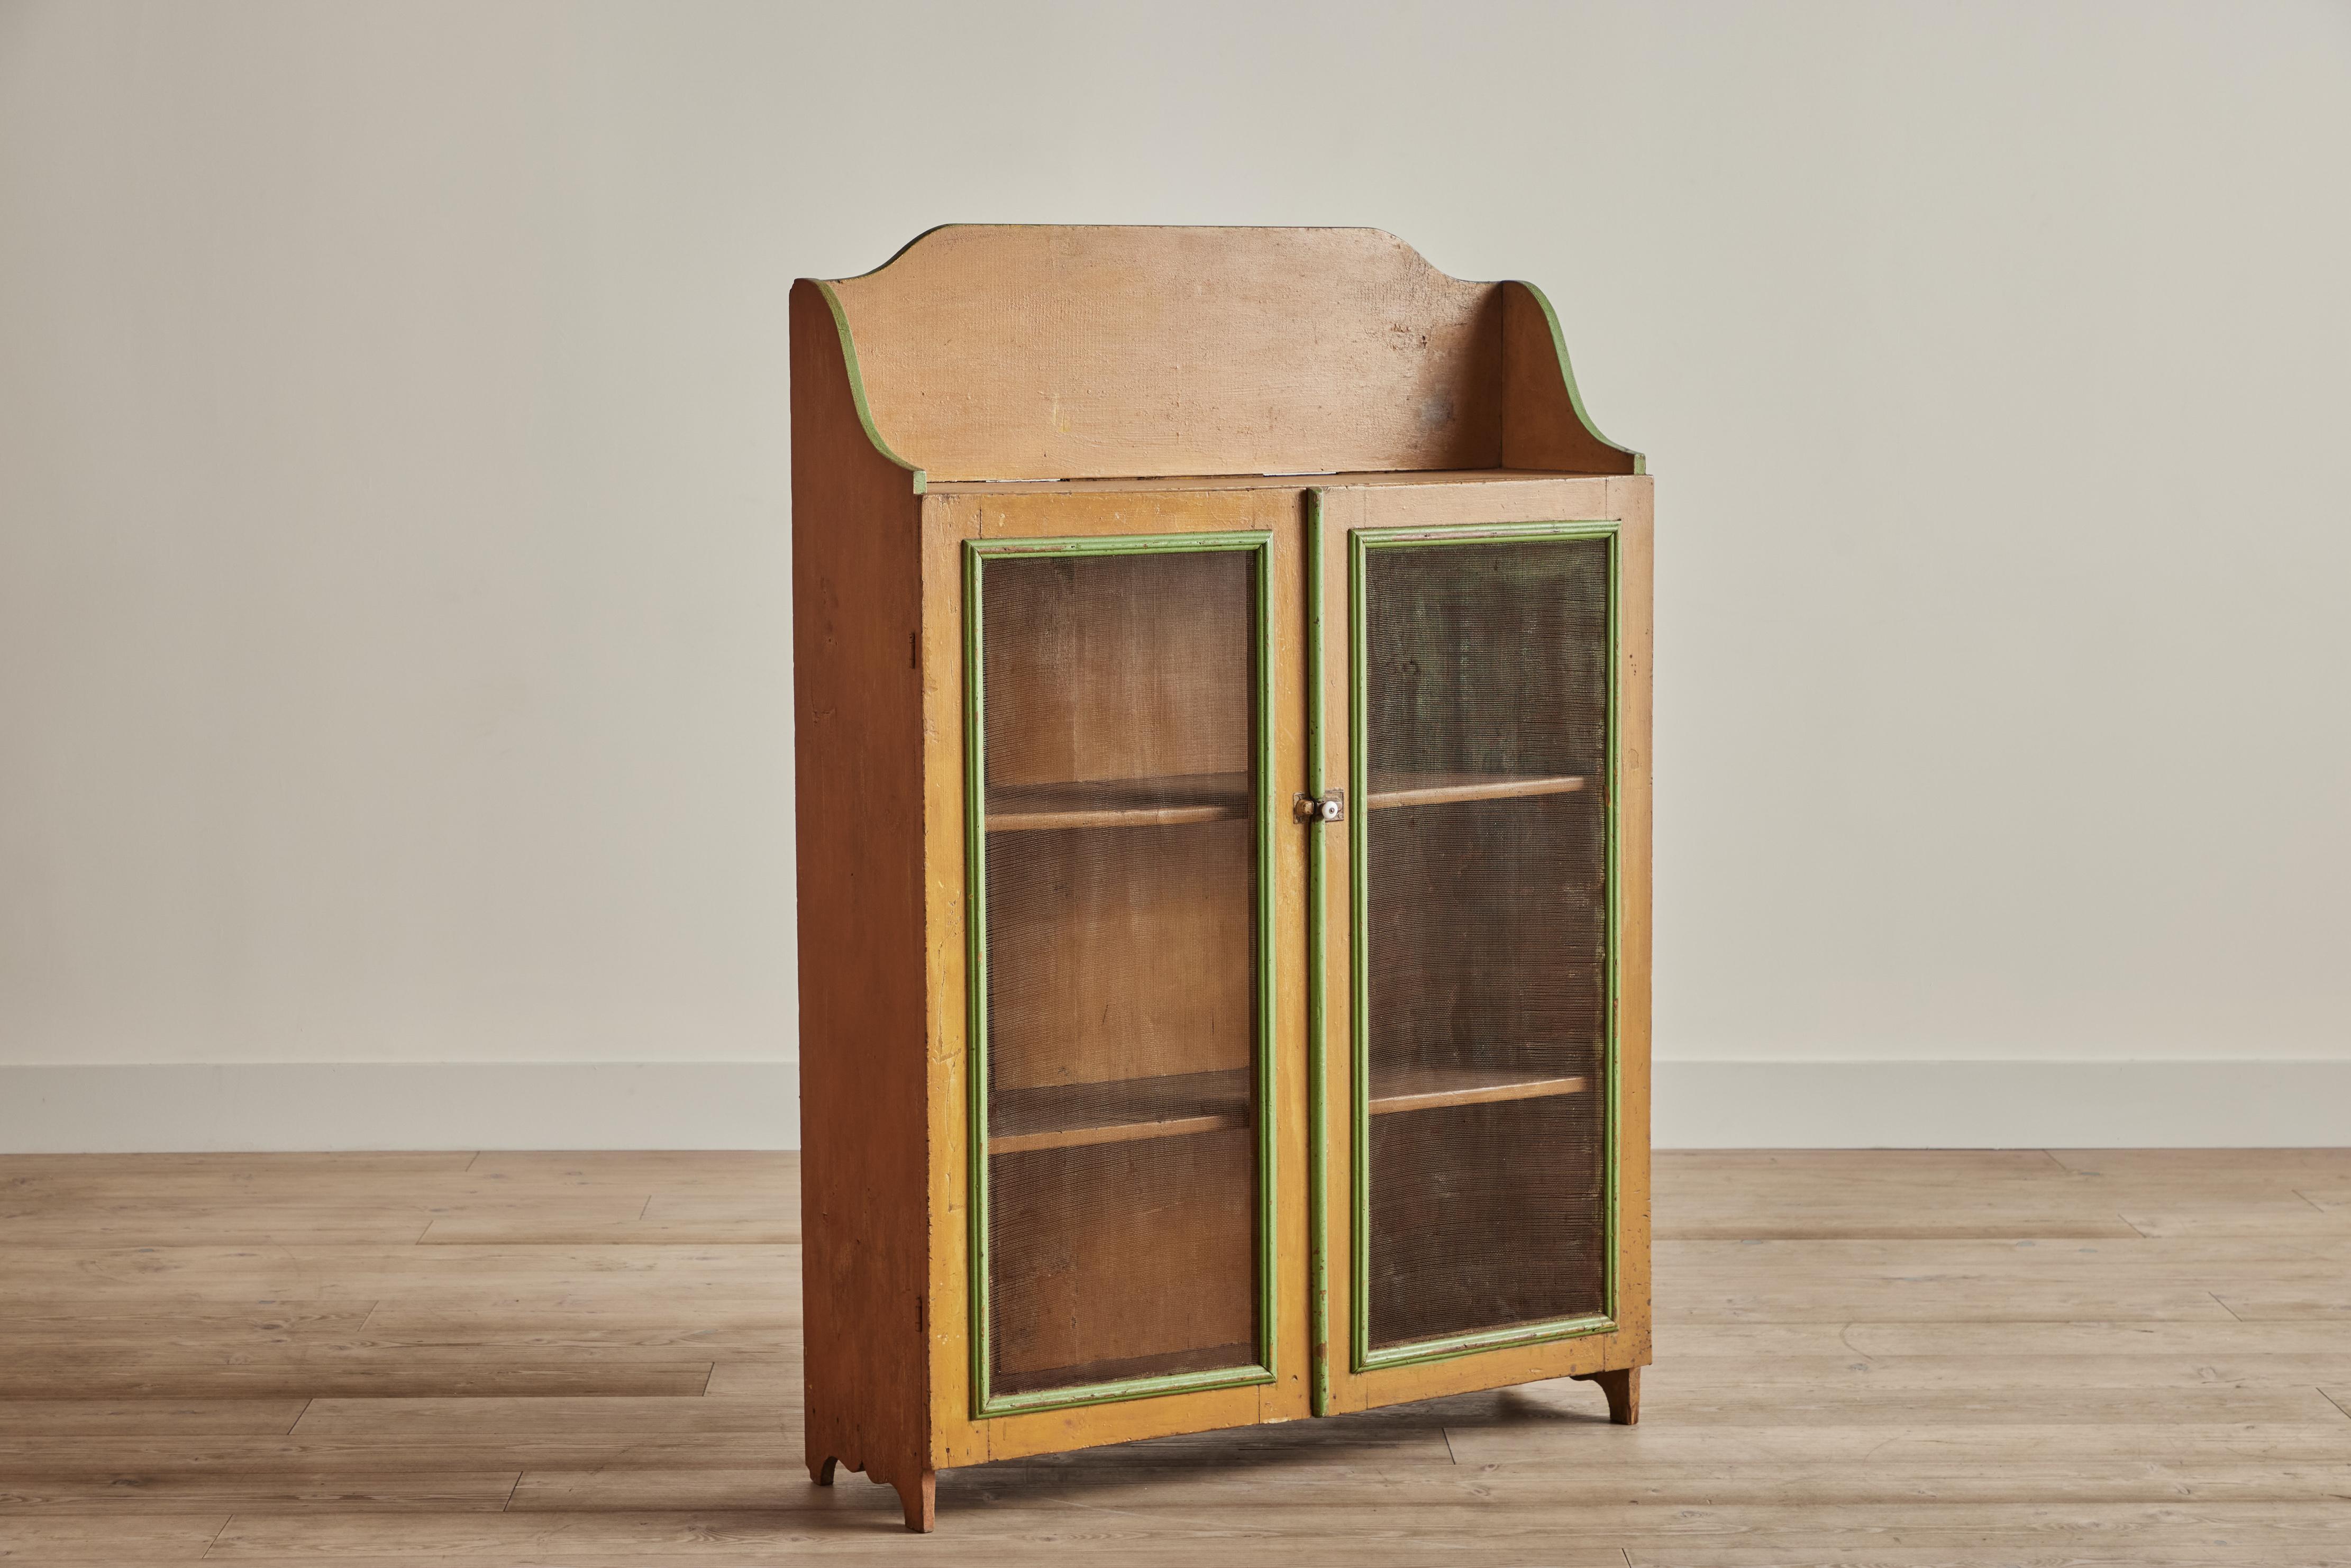 Rustic 19th century gallery top pie safe cabinet painted in a vibrant pumpkin color with bright green trim. Interior compartment as two shelves for ample storage. Visible wear throughout that is consistent with age and use. 